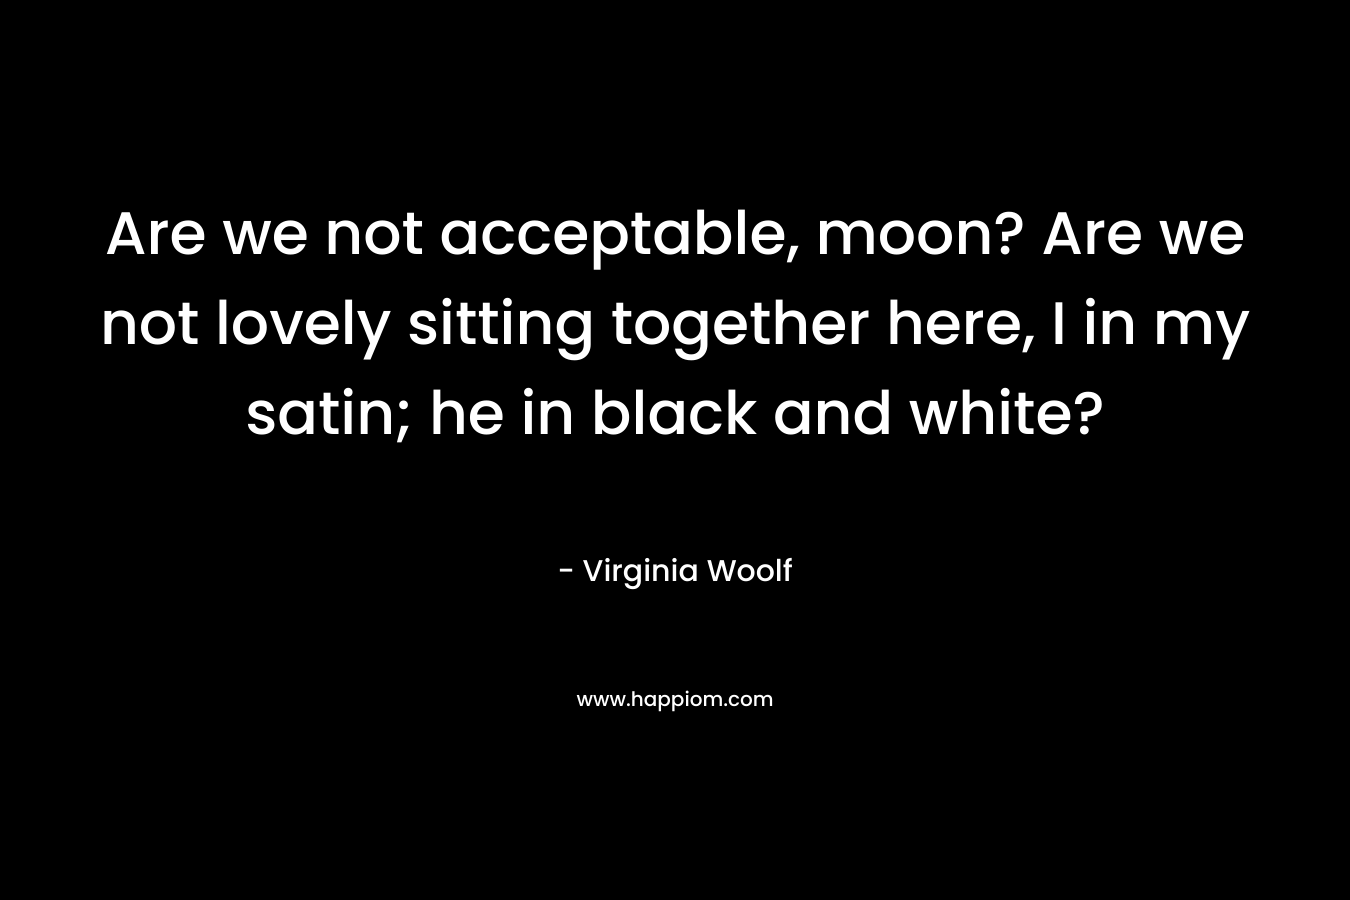 Are we not acceptable, moon? Are we not lovely sitting together here, I in my satin; he in black and white? – Virginia Woolf